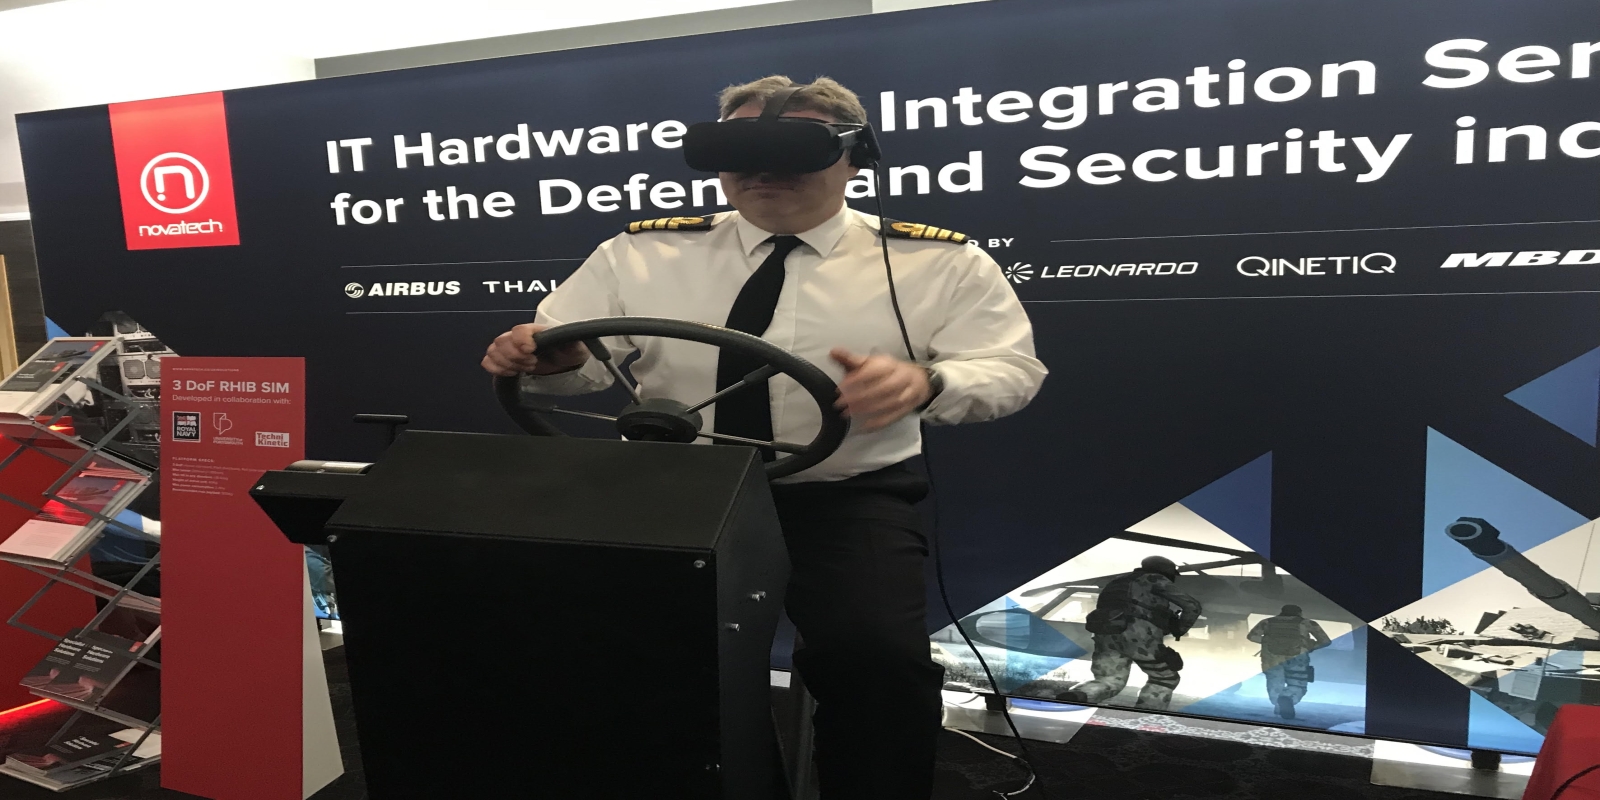 Novatech's VR RHIB motion simulator leverage VBS3's out-of-the-box VR capabilities